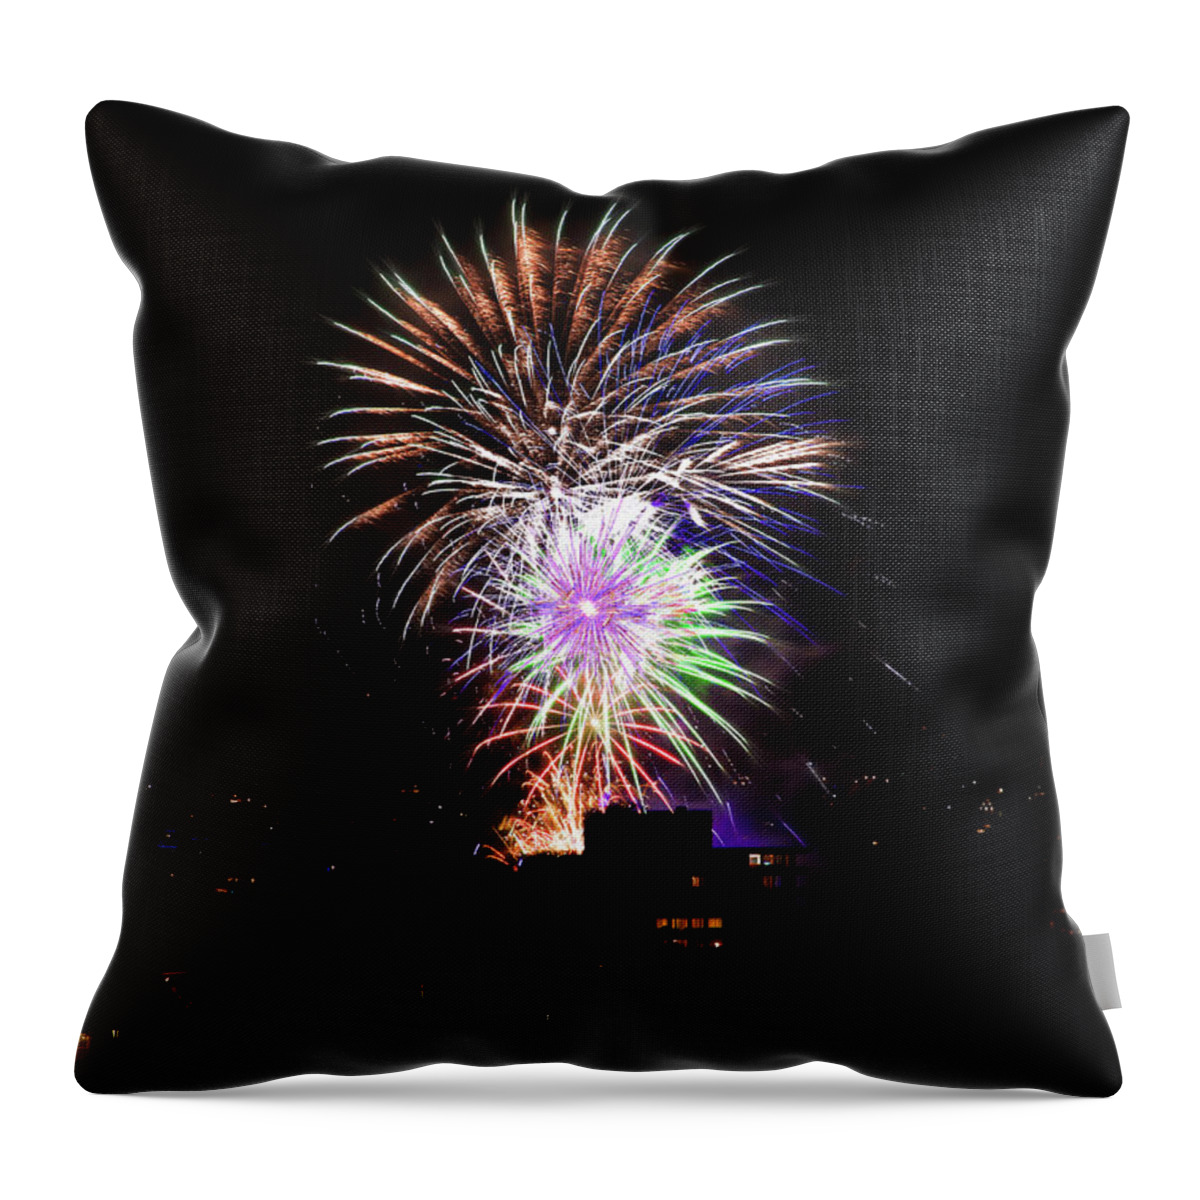 Fireworks Throw Pillow featuring the photograph Fireworks In Manly by Miroslava Jurcik